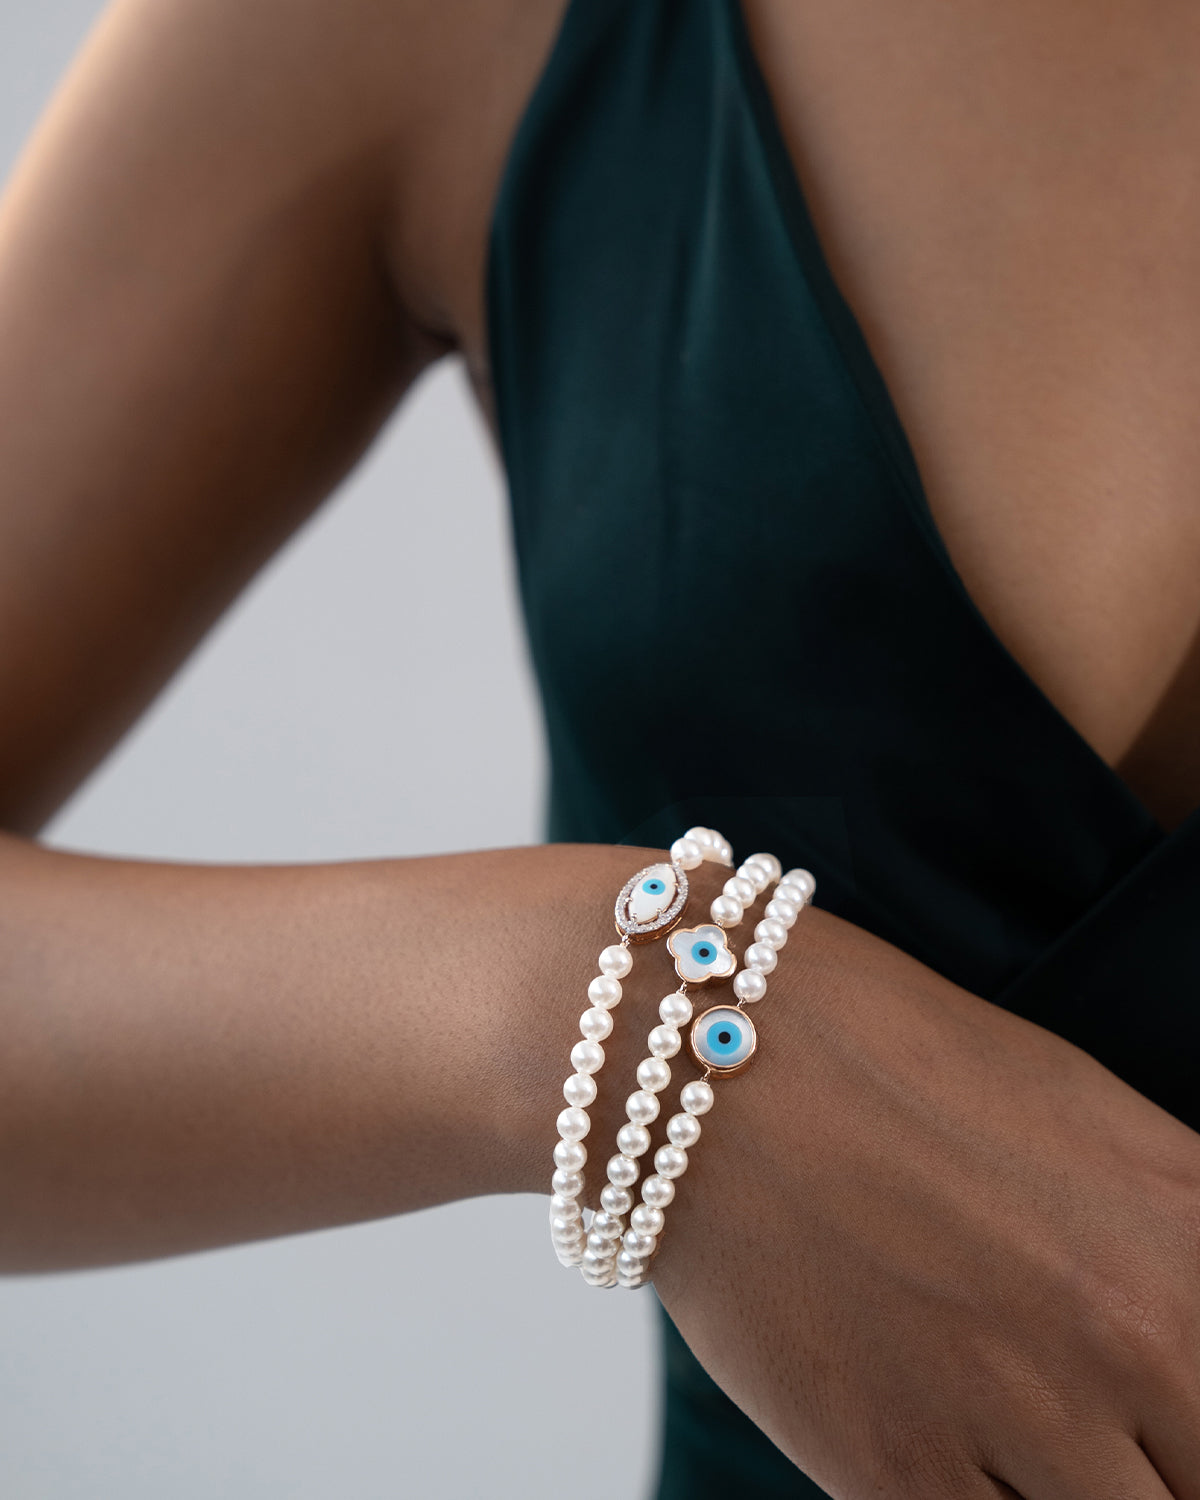 Faux Pearl Bracelet with Magnetic Ball Clasp | ERICA ZAP DESIGNS